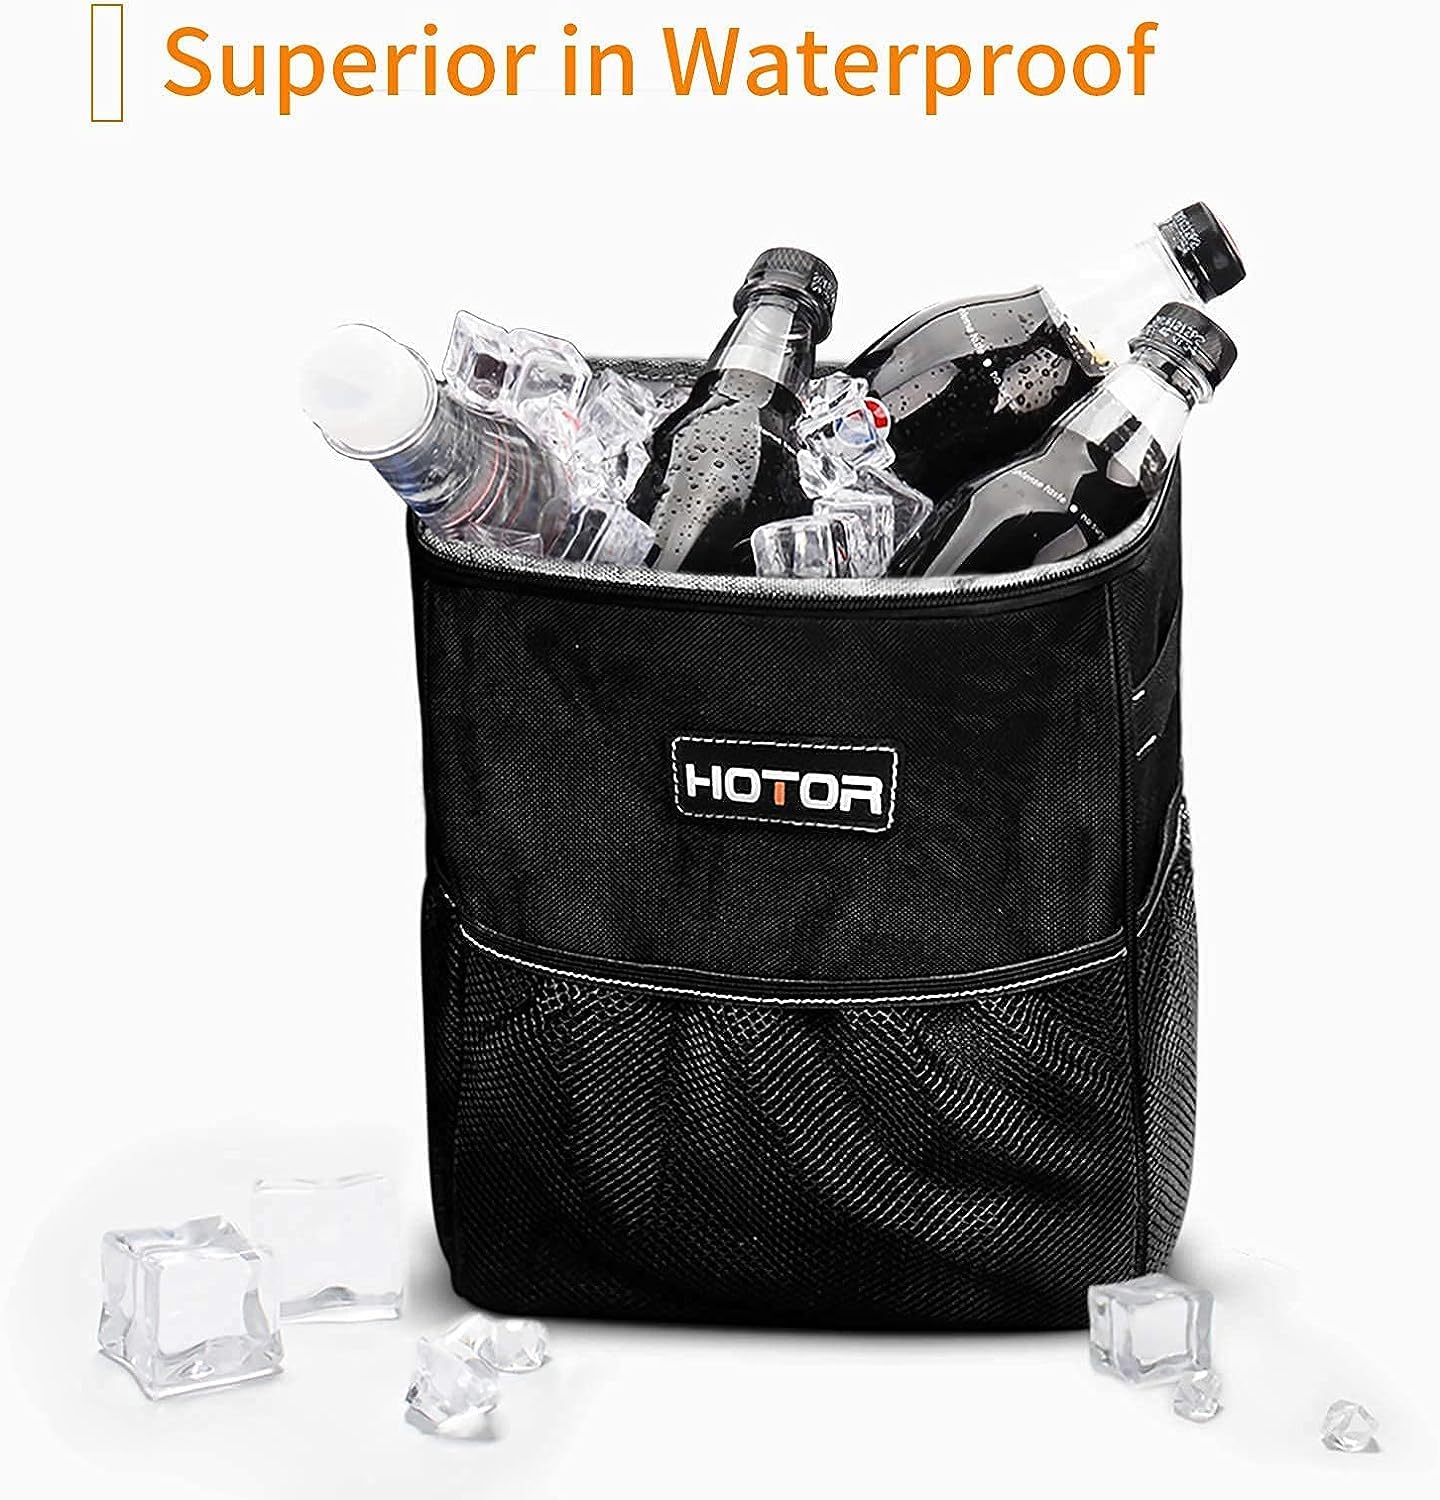 HOTOR Car Trash Can with Lid and Storage Pockets - $4.50 + Free Shipping